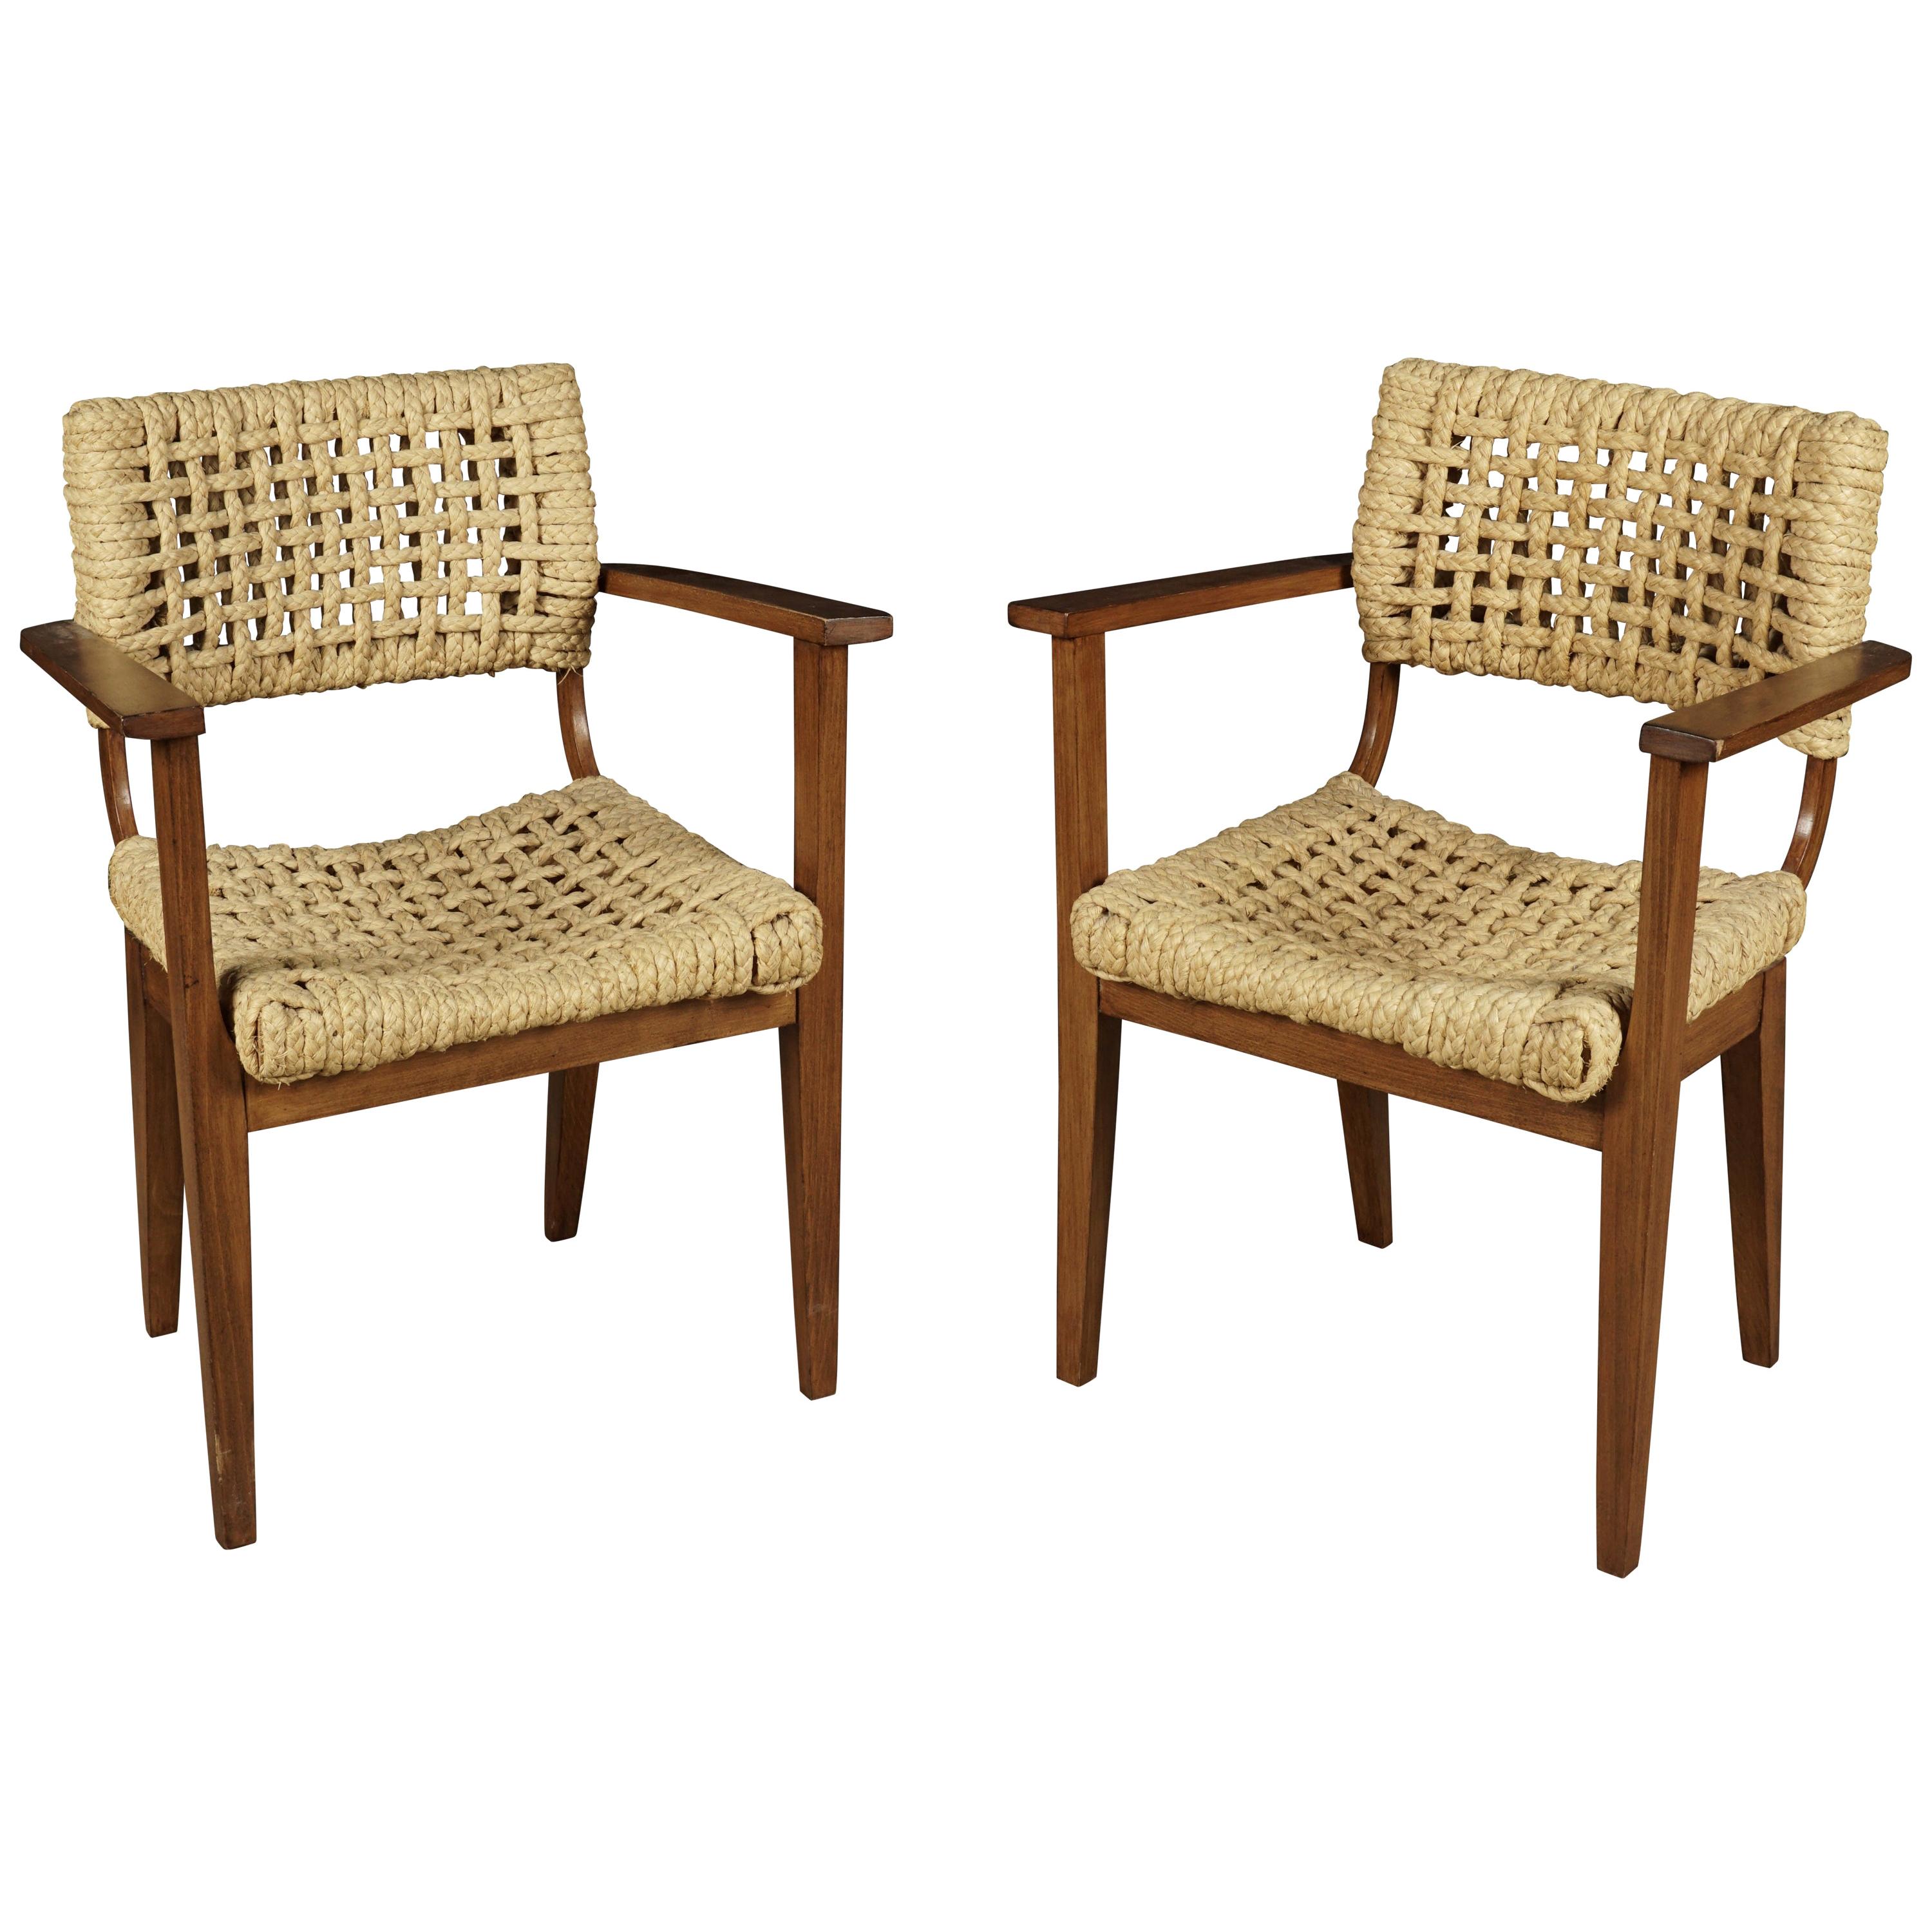 Vintage Pair of Audoux Minet Armchairs from France, circa 1940